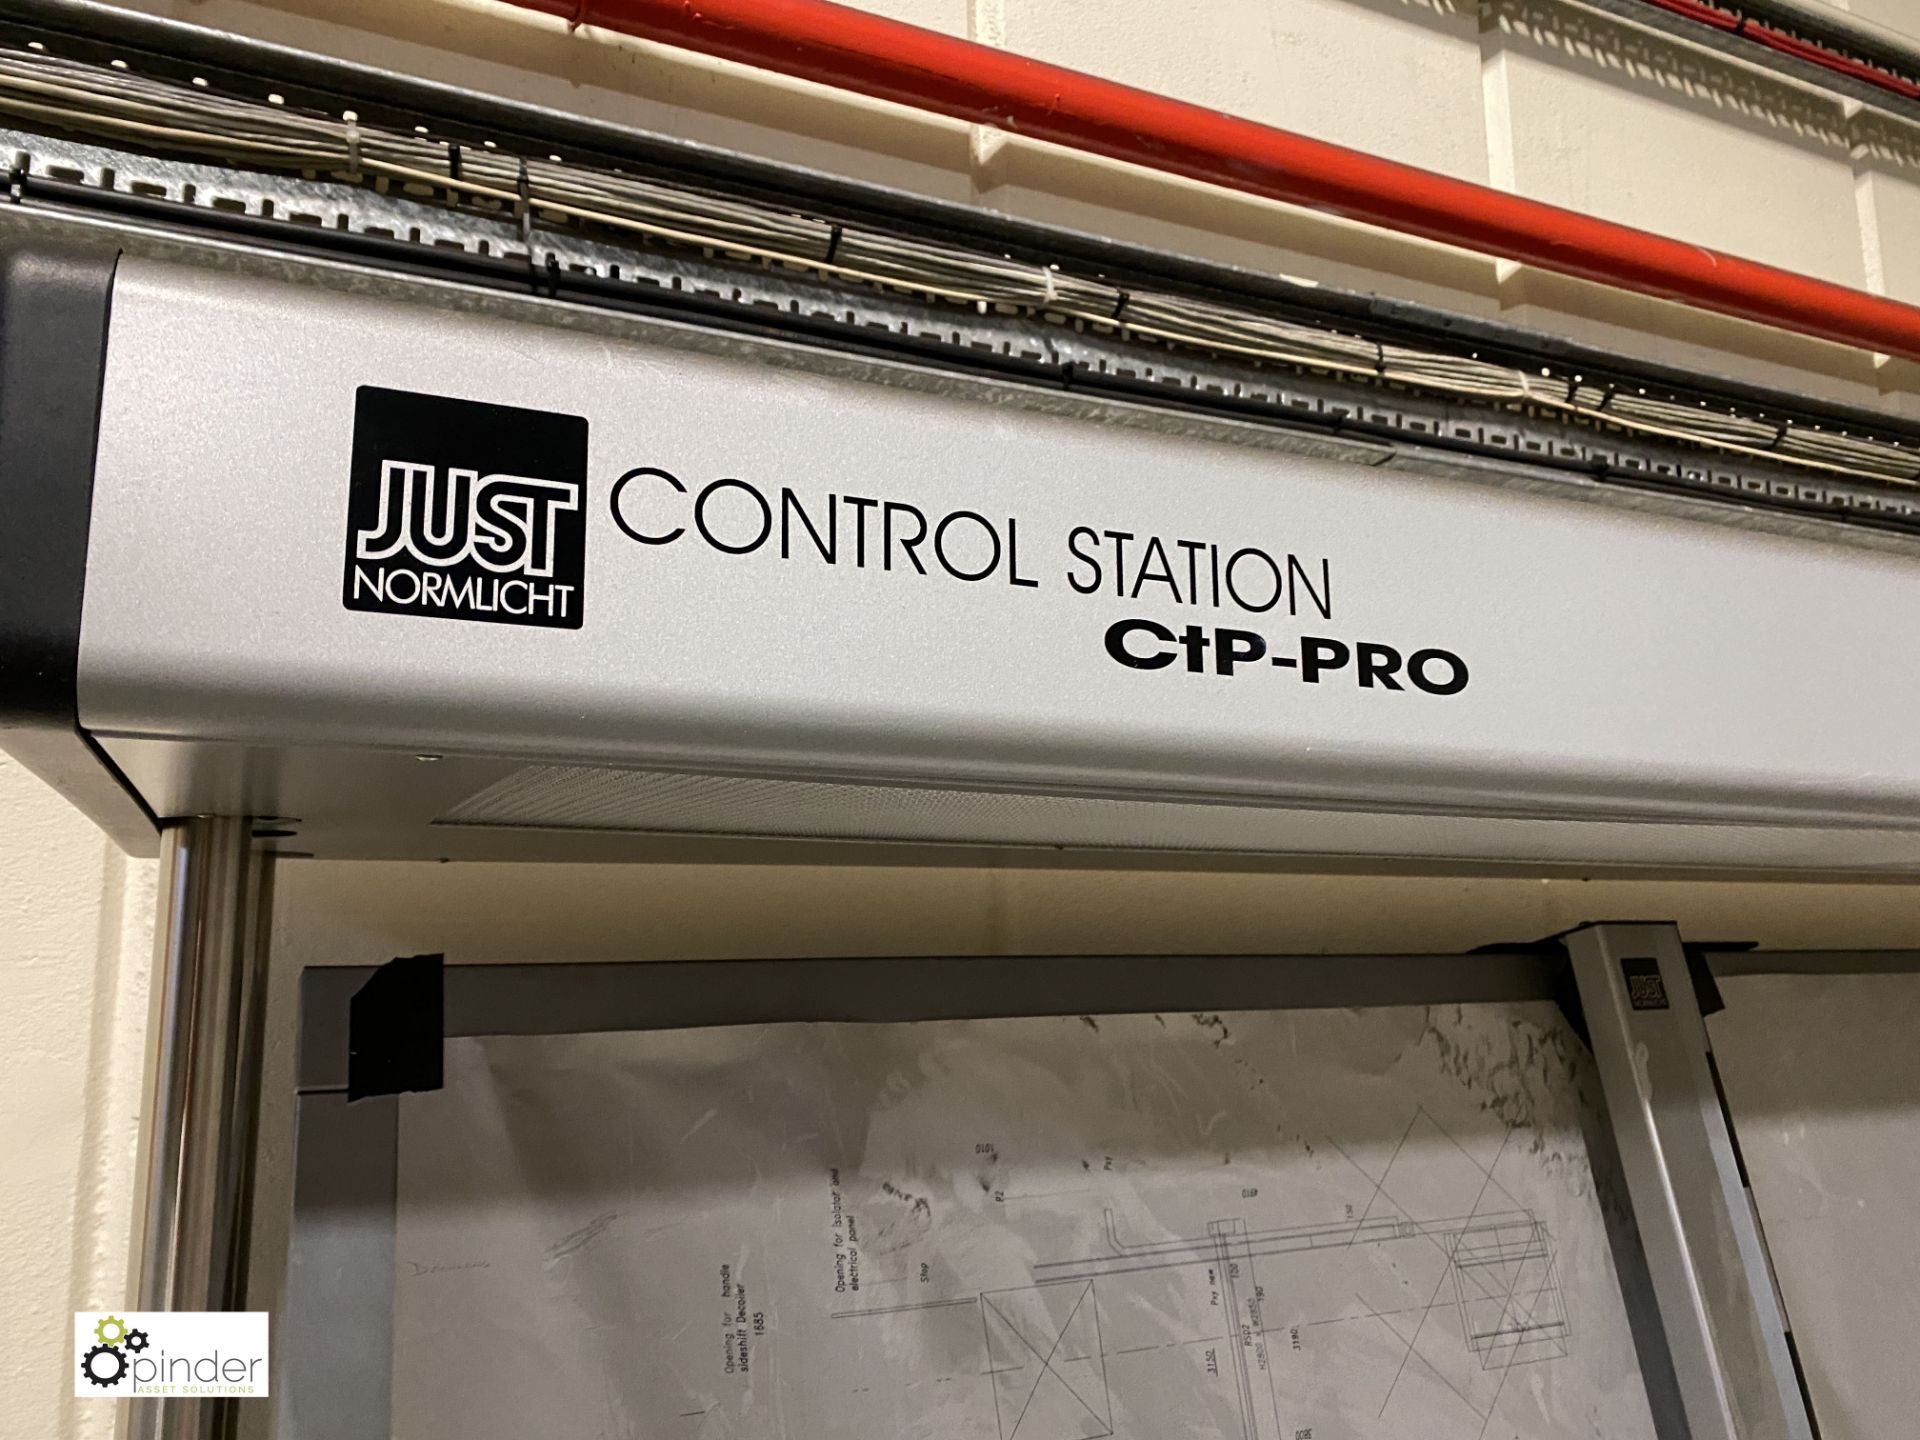 Just Normlight CtP-PRO inclined Control Station, 2 - Image 3 of 4